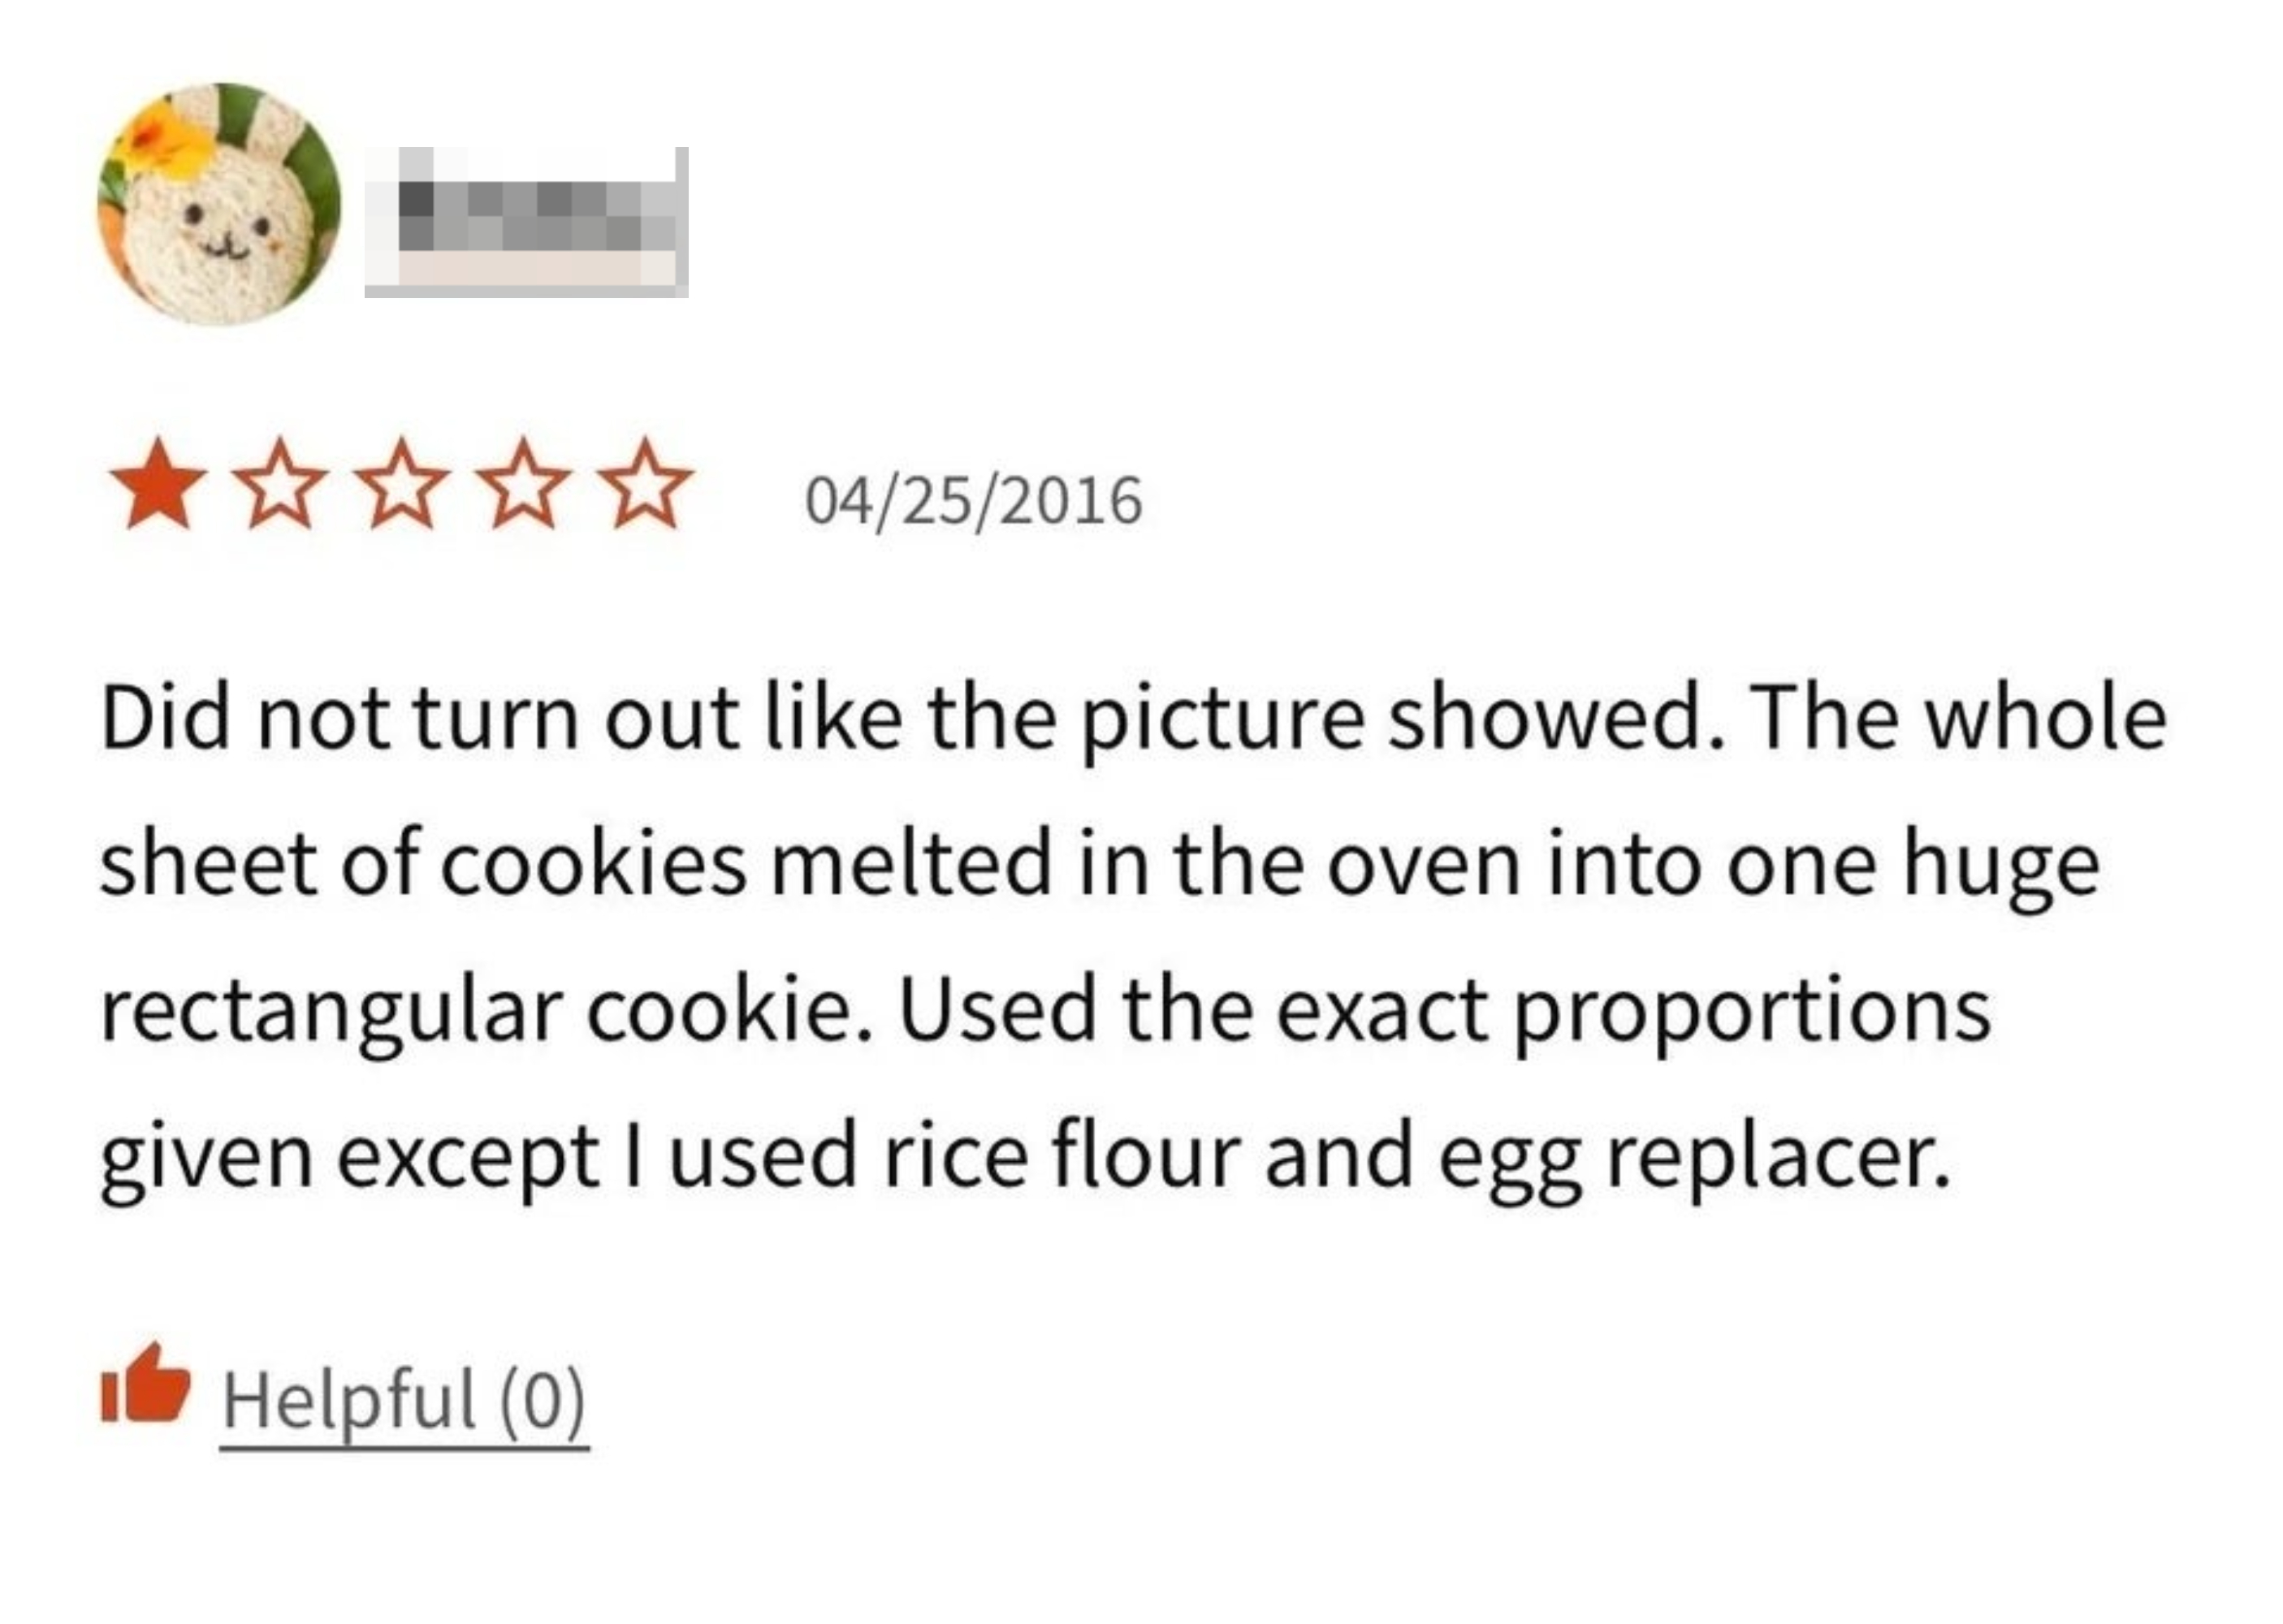 A 1-star review for cookies that melted in the oven into one huge rectangular cookie, where the reviewer admits to using rice flour and an egg replacer